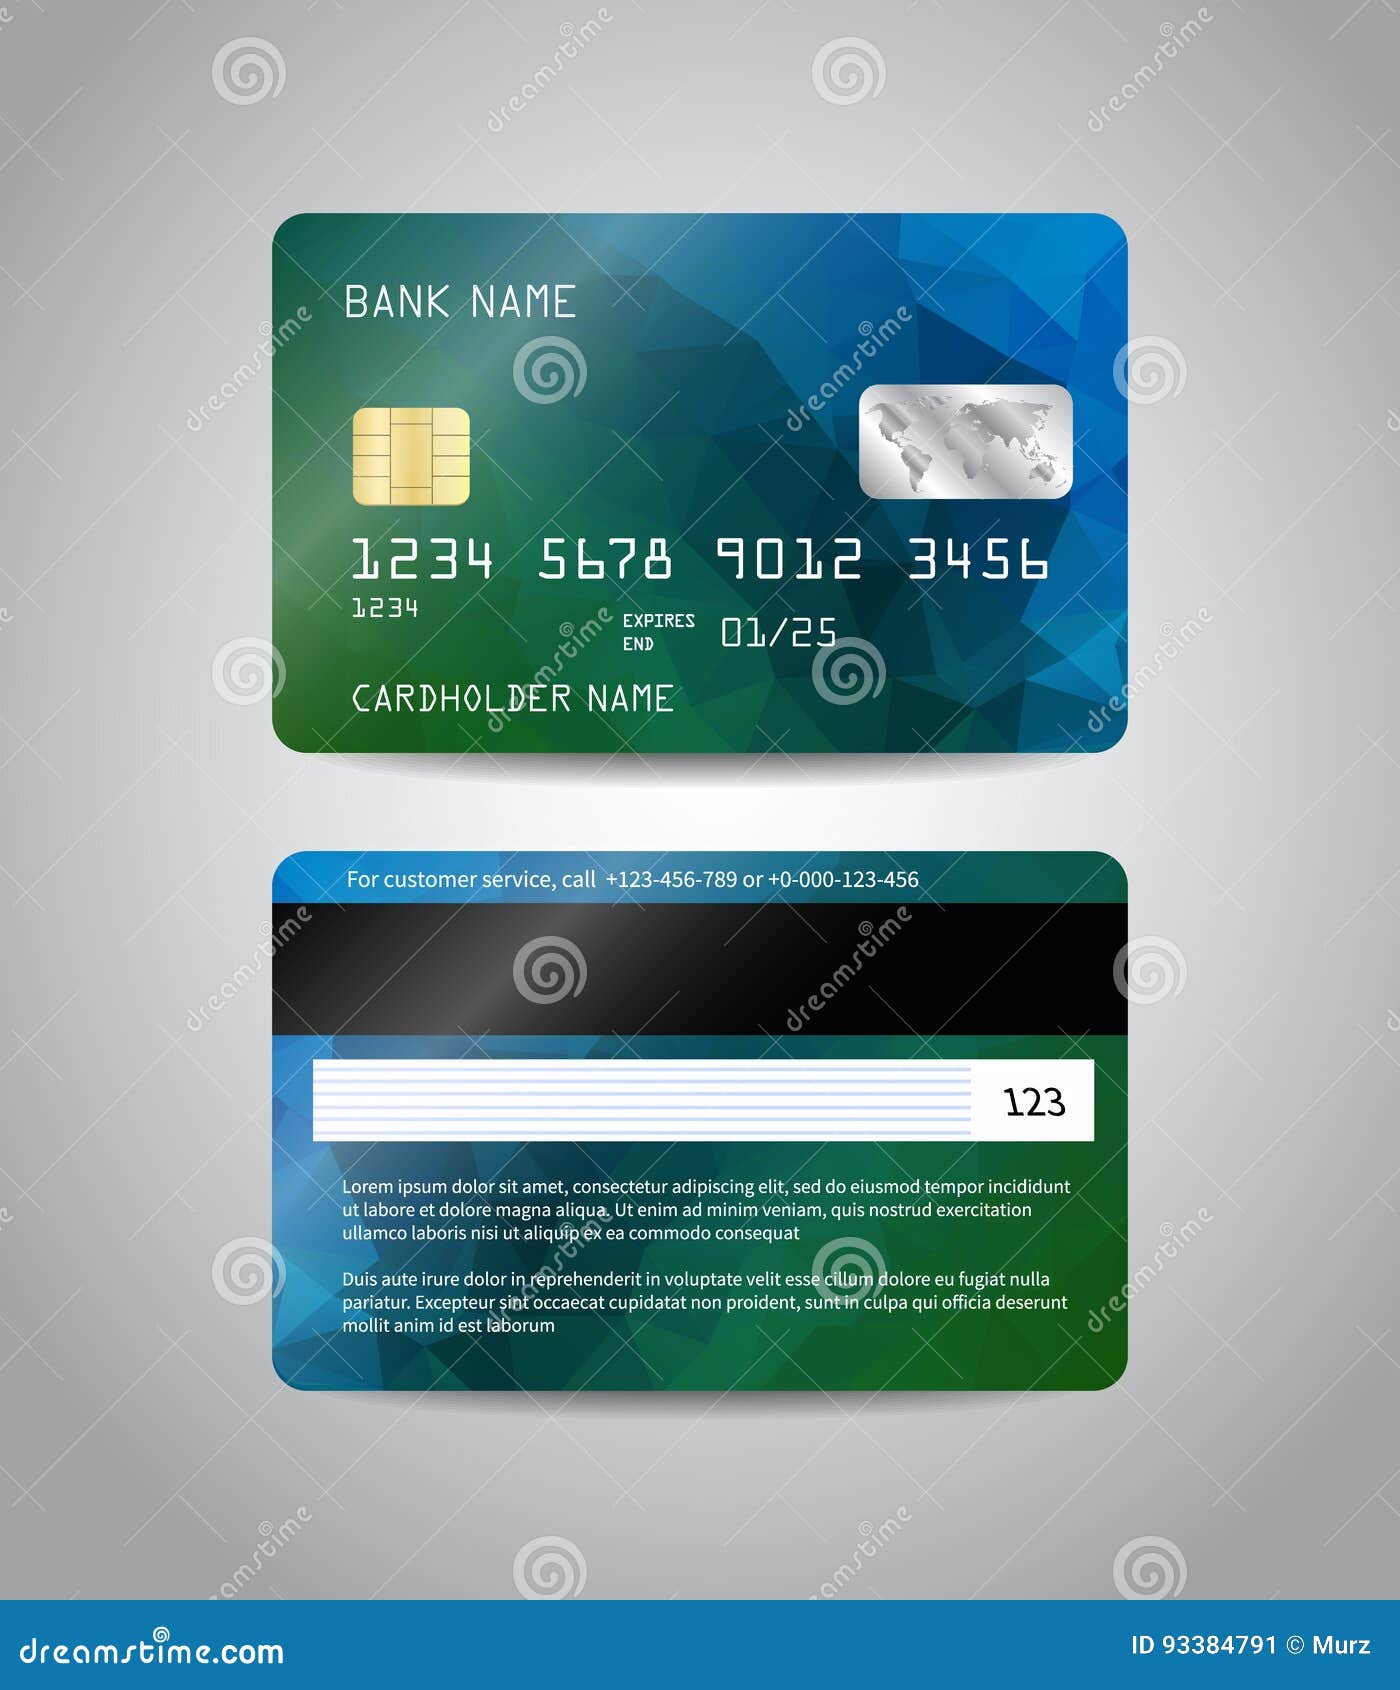 Realistic Detailed Credit Card Stock Vector - Illustration of economy ...